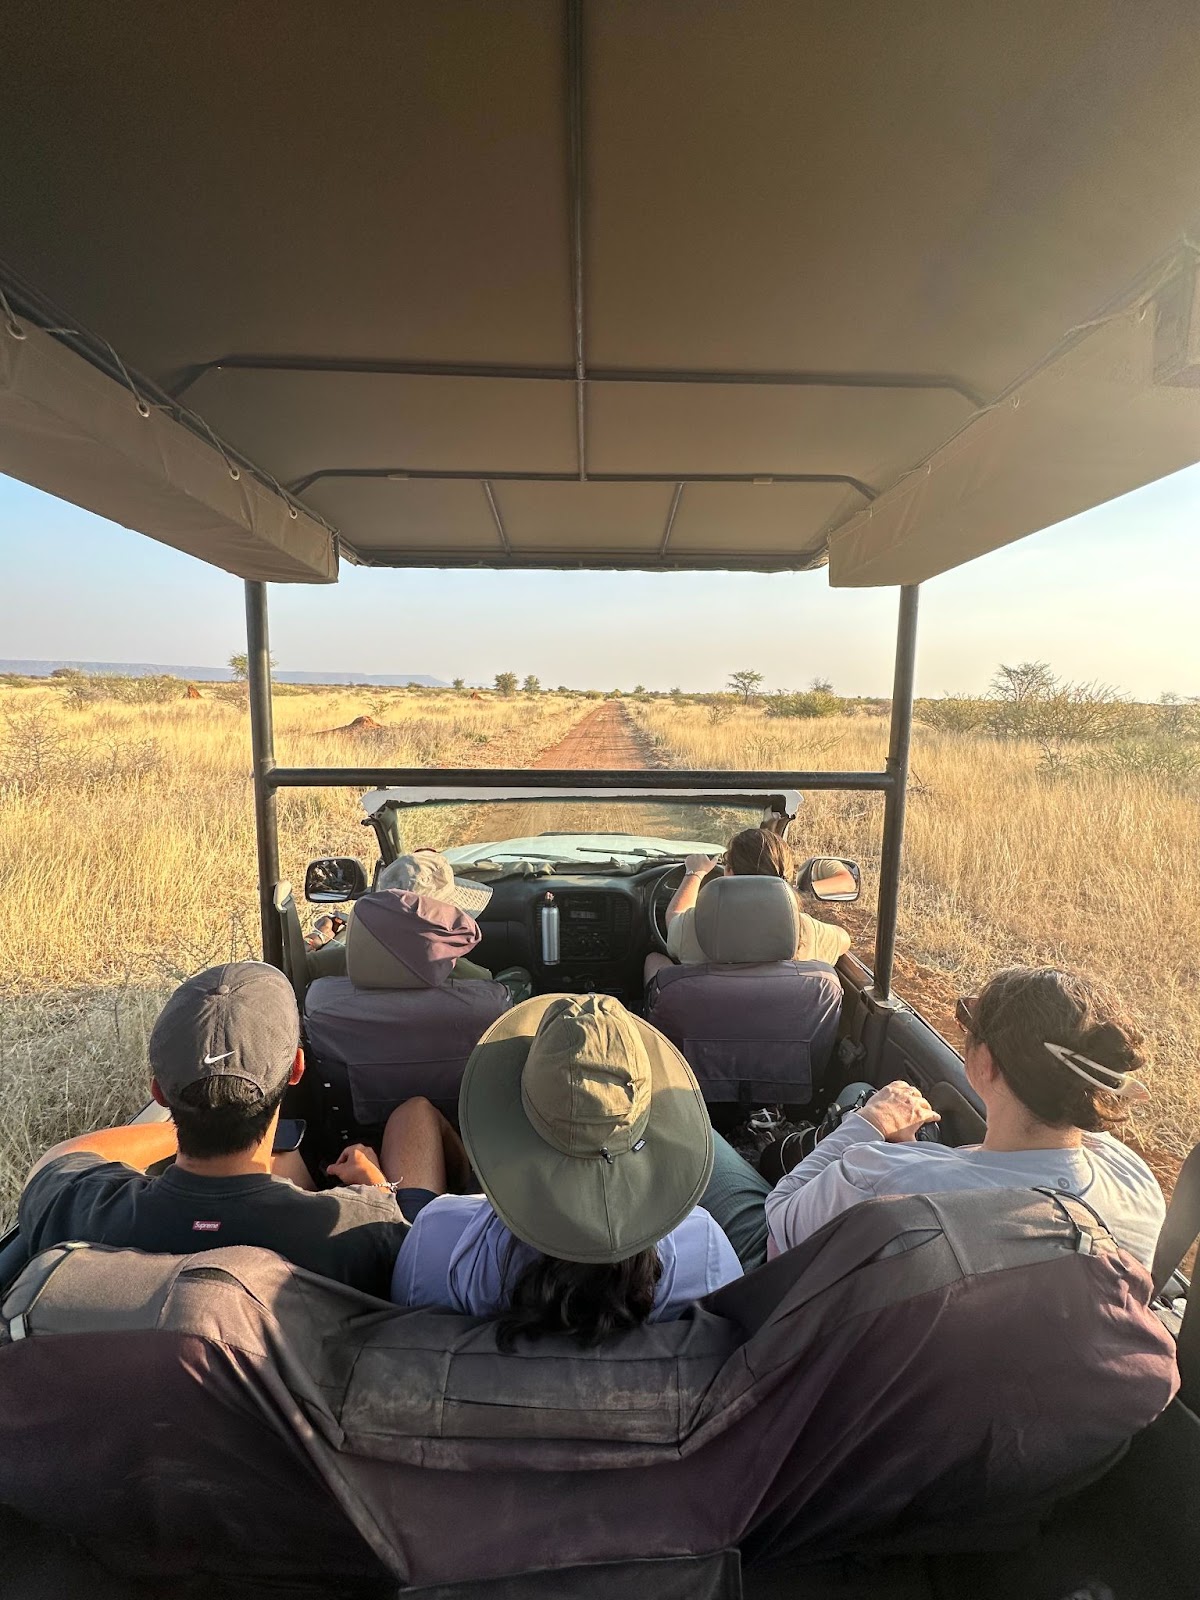 The view of the open-air game drive vehicle and the vast savannah landscape.